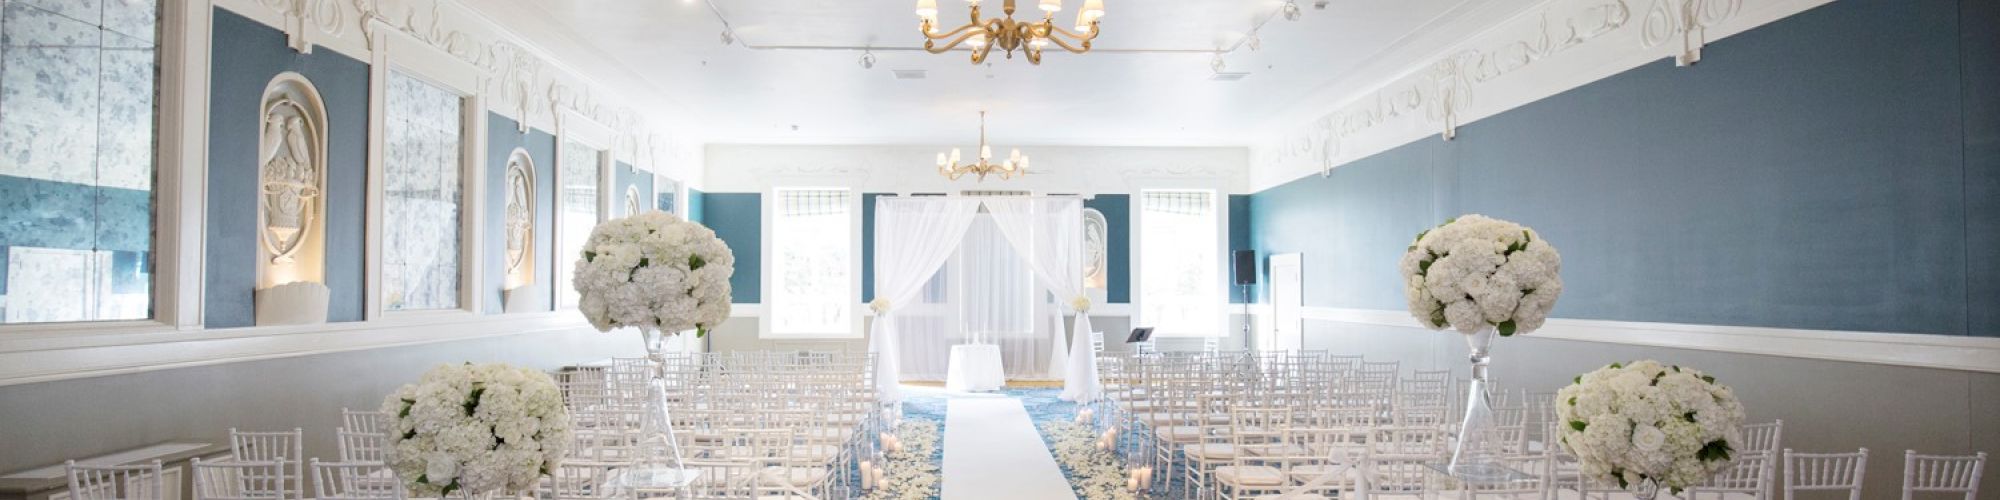 A wedding ceremony setup with rows of white chairs, floral arrangements, and a white aisle runner in an elegant, well-lit room ending the sentence.